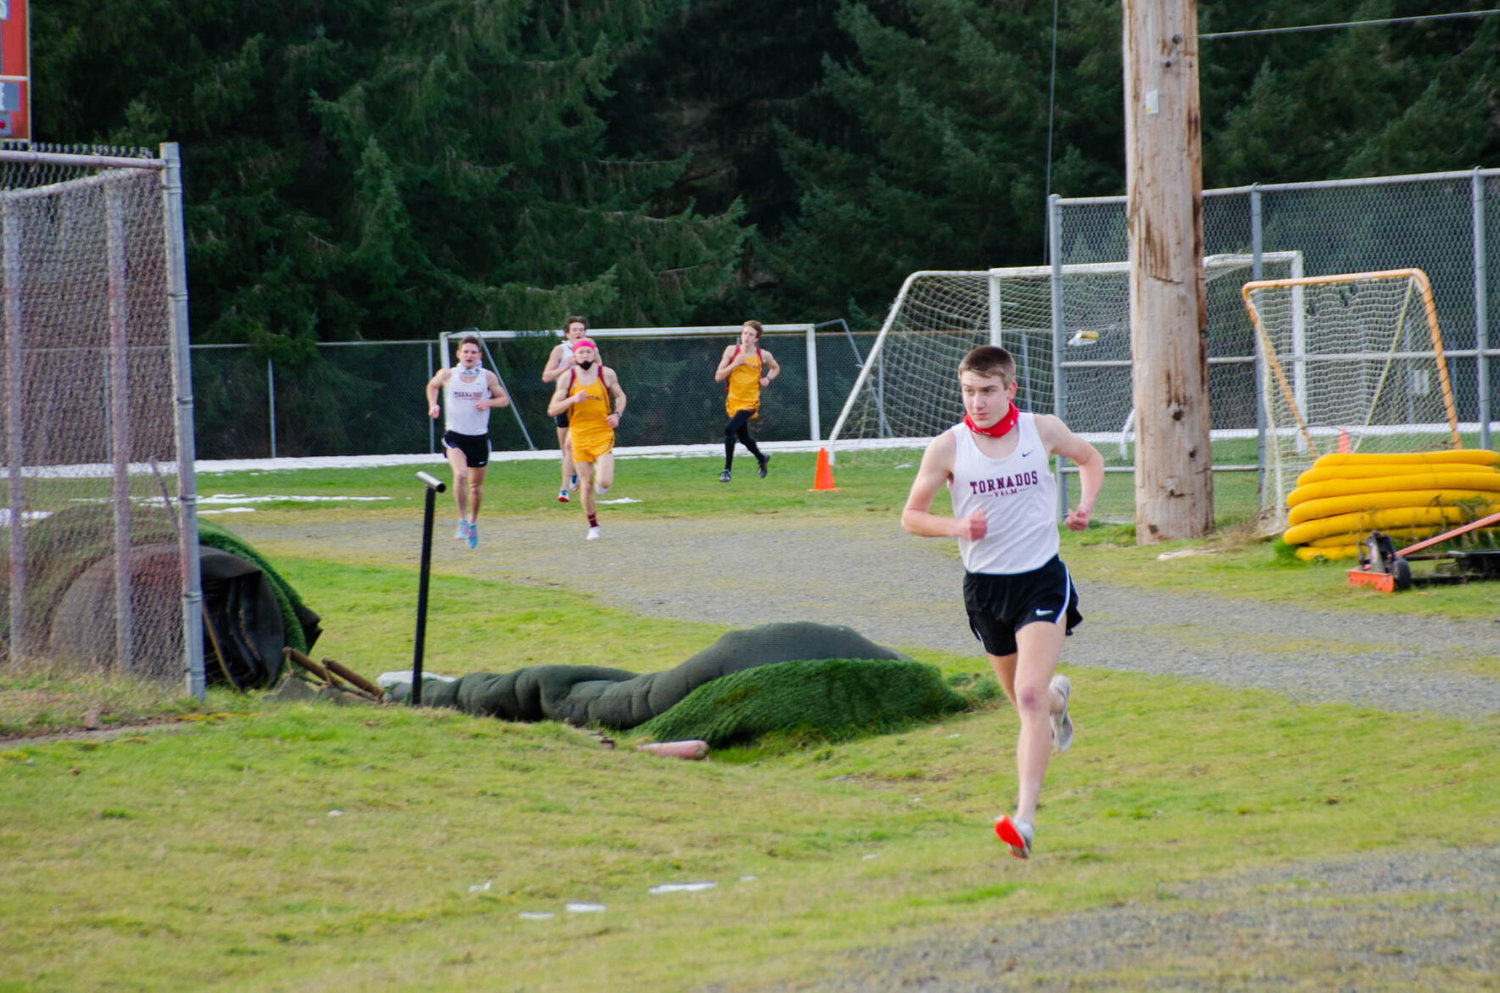 Yelm's Bryce Cerkowniak, a top 3A state runner, leads the pack Wednesday at Capital. 